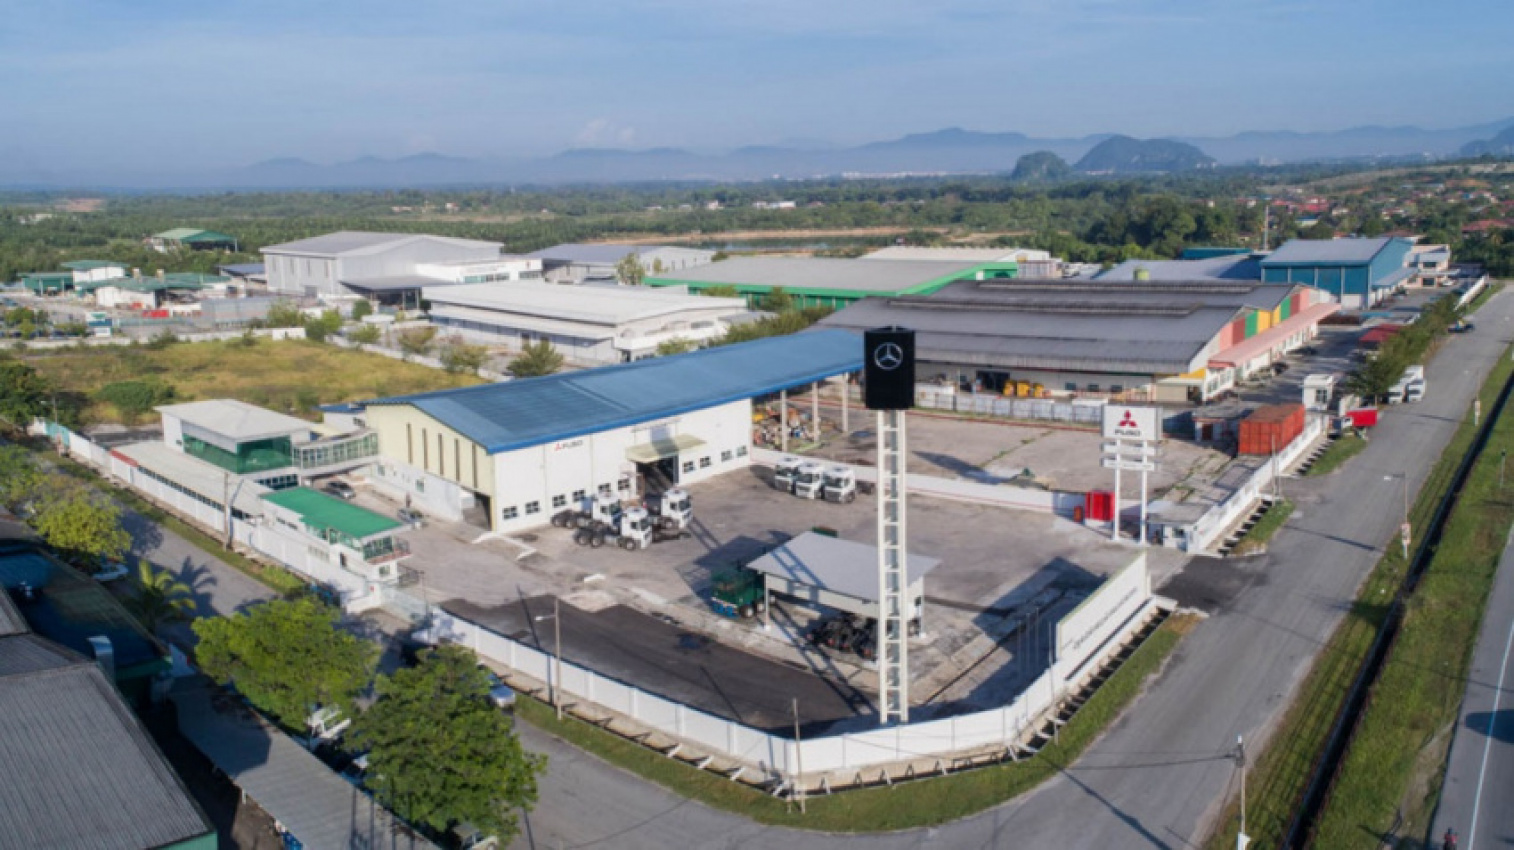 autos, cars, commercial vehicles, mercedes-benz, 3s centre, commercial vehicle, cycle & carriage bintang, fuso, mercedes, cycle & carriage bintang opens new 3s cv centre for mercedes-benz & fuso commercial vehicles near ipoh